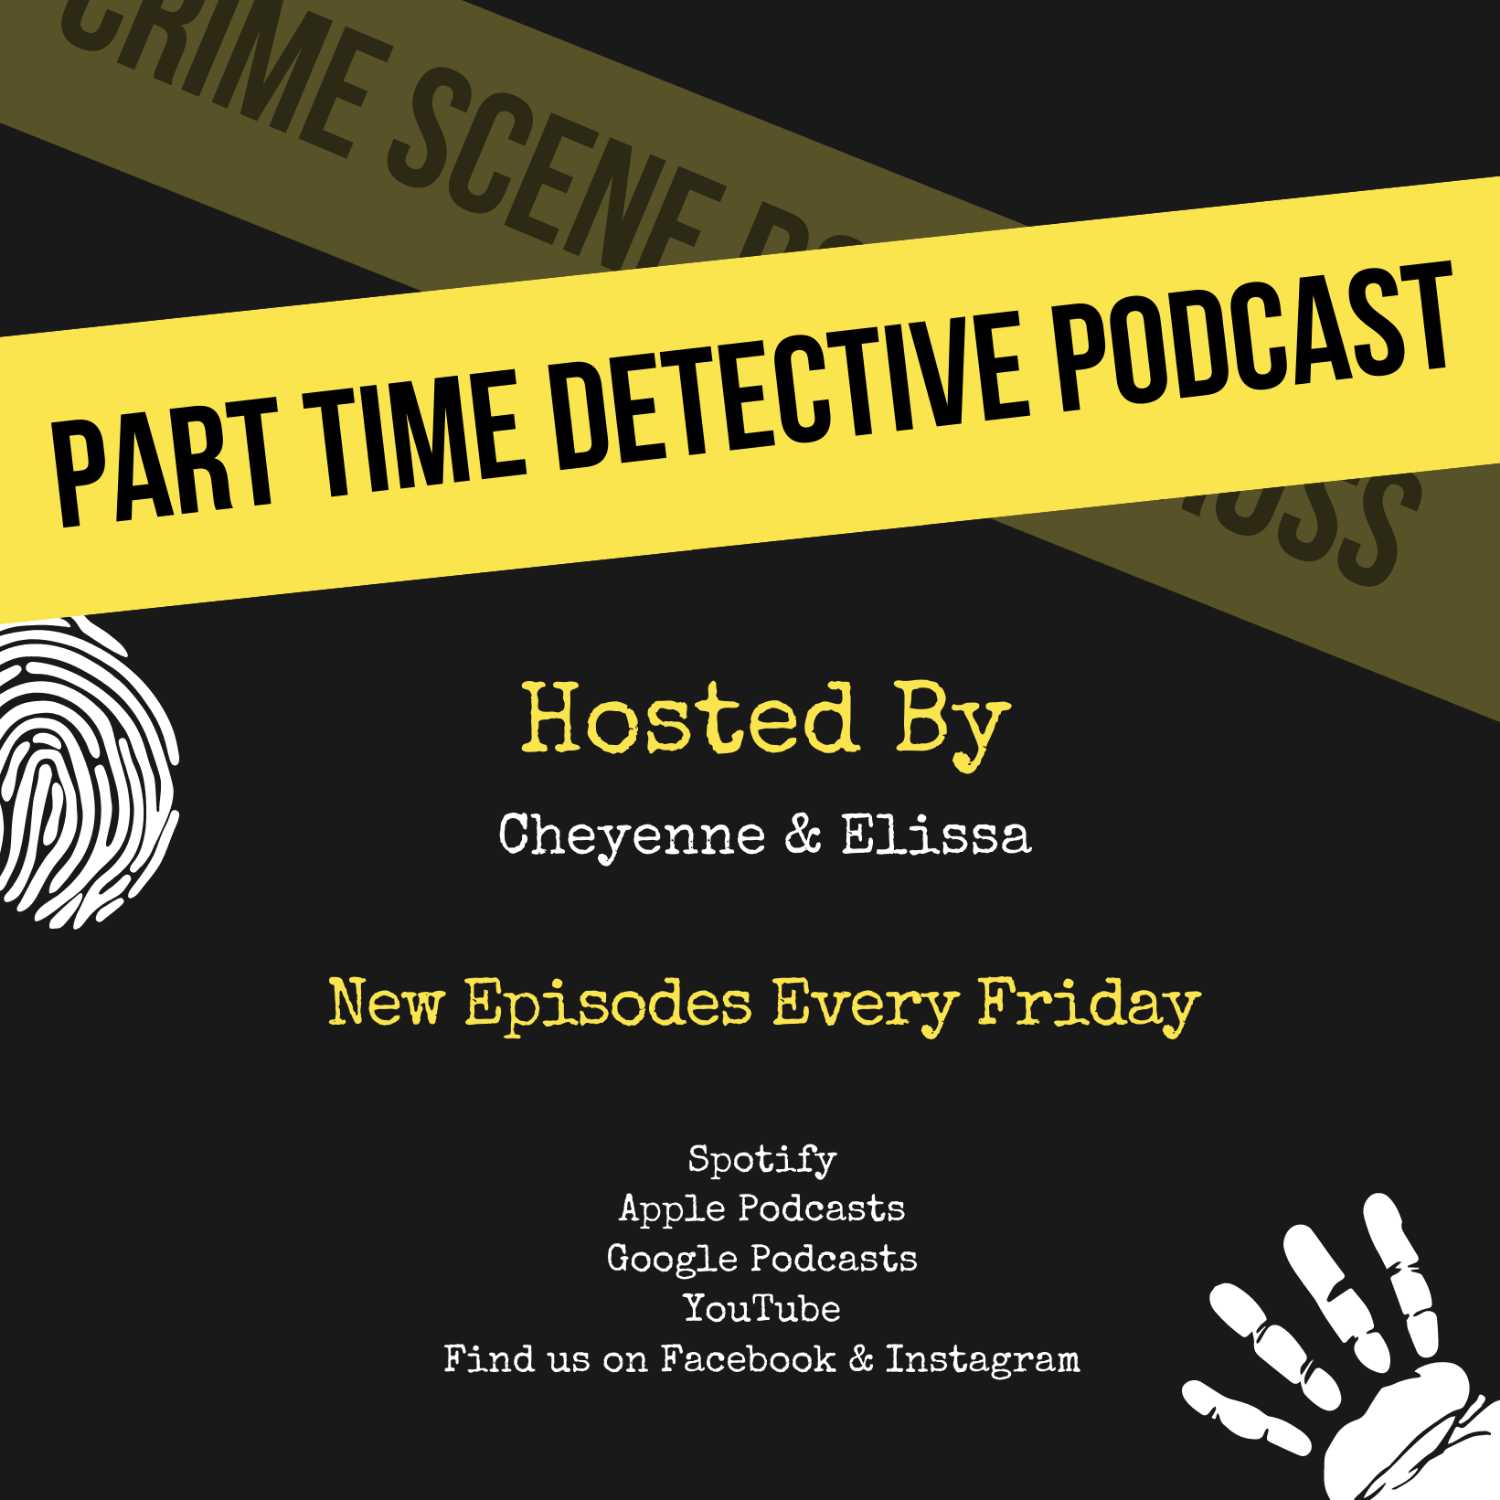 Part Time Detective Podcast